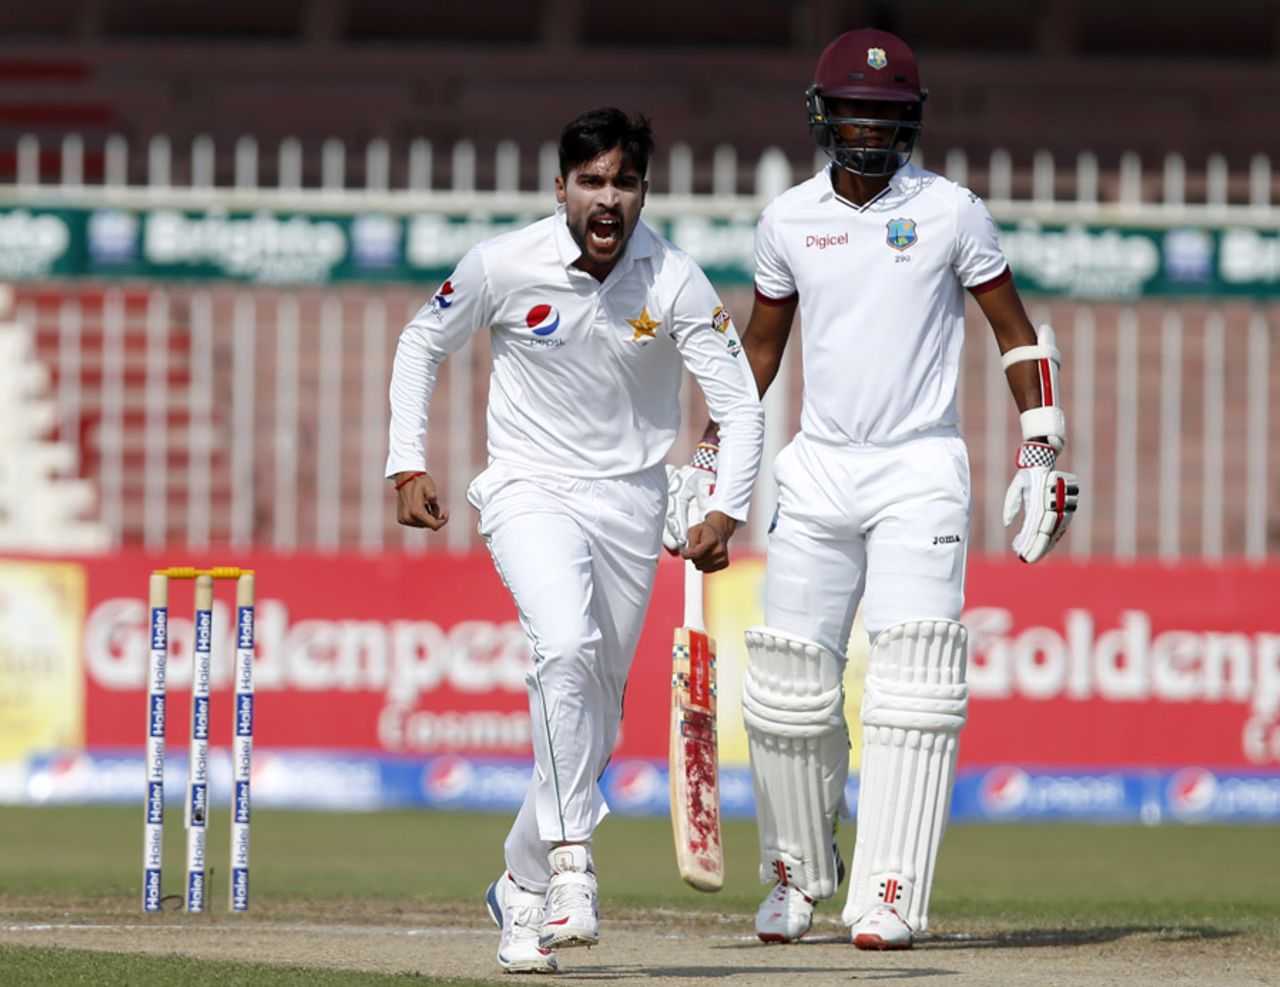 Mohammad Amir is livid after a dropped catch, Pakistan v West Indies, 3rd Test, Sharjah, 4th day, November 2, 2016